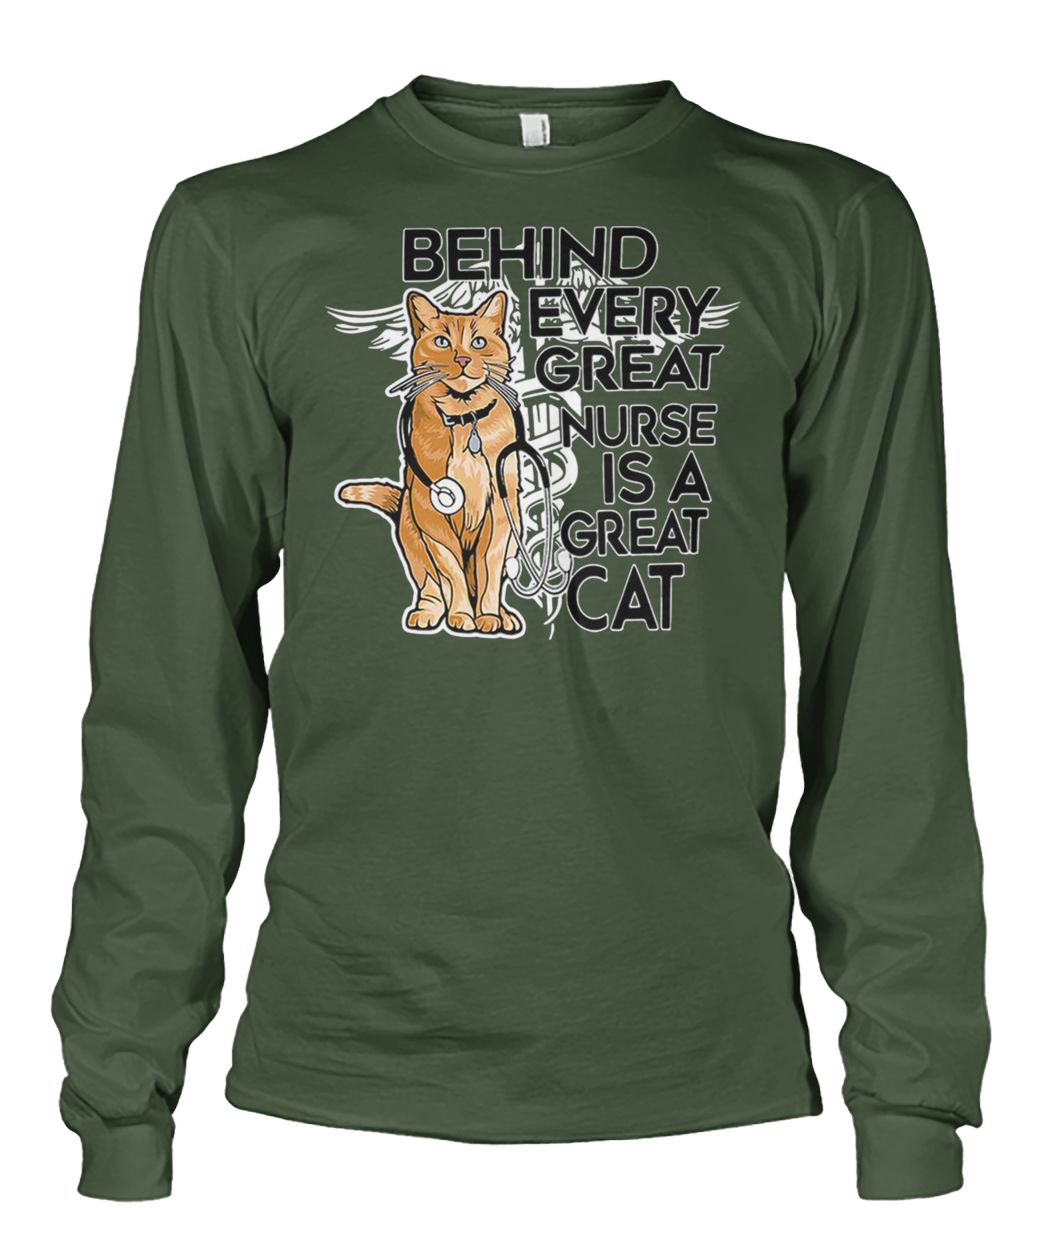 Behind every great nurse is a great captain marvel goose cat unisex long sleeve